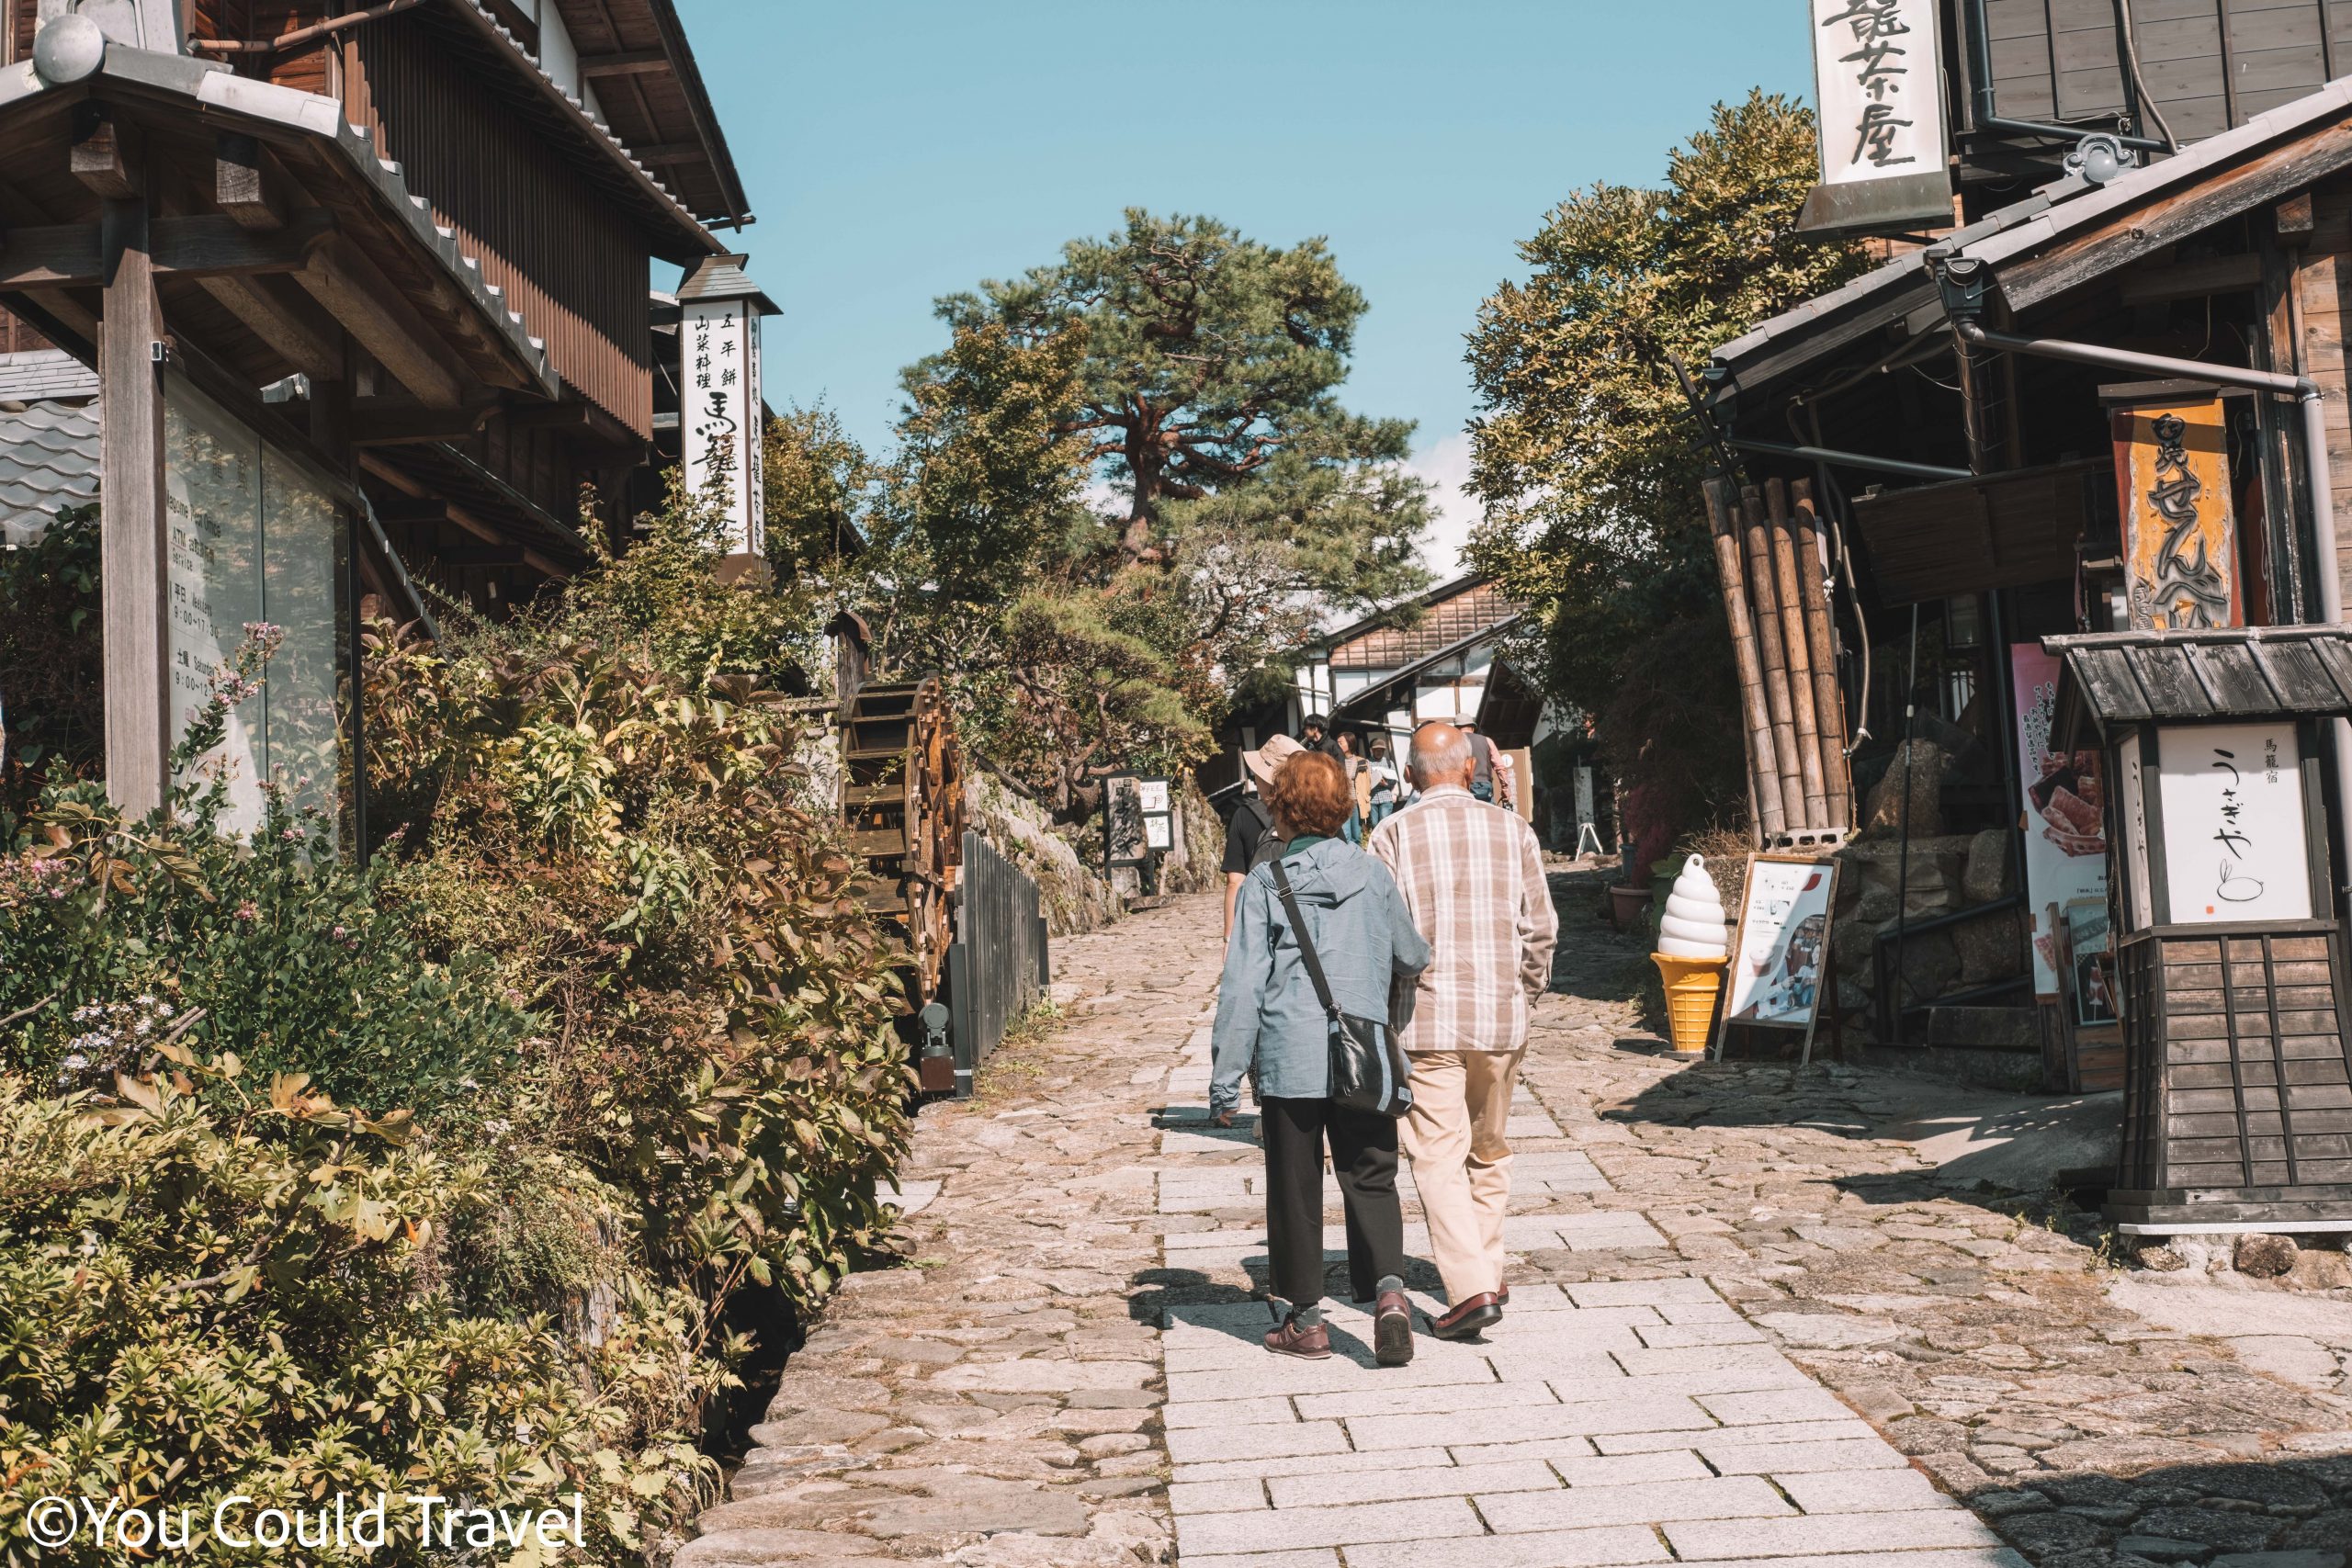 Magome Juku is now a thriving attraction in Japan